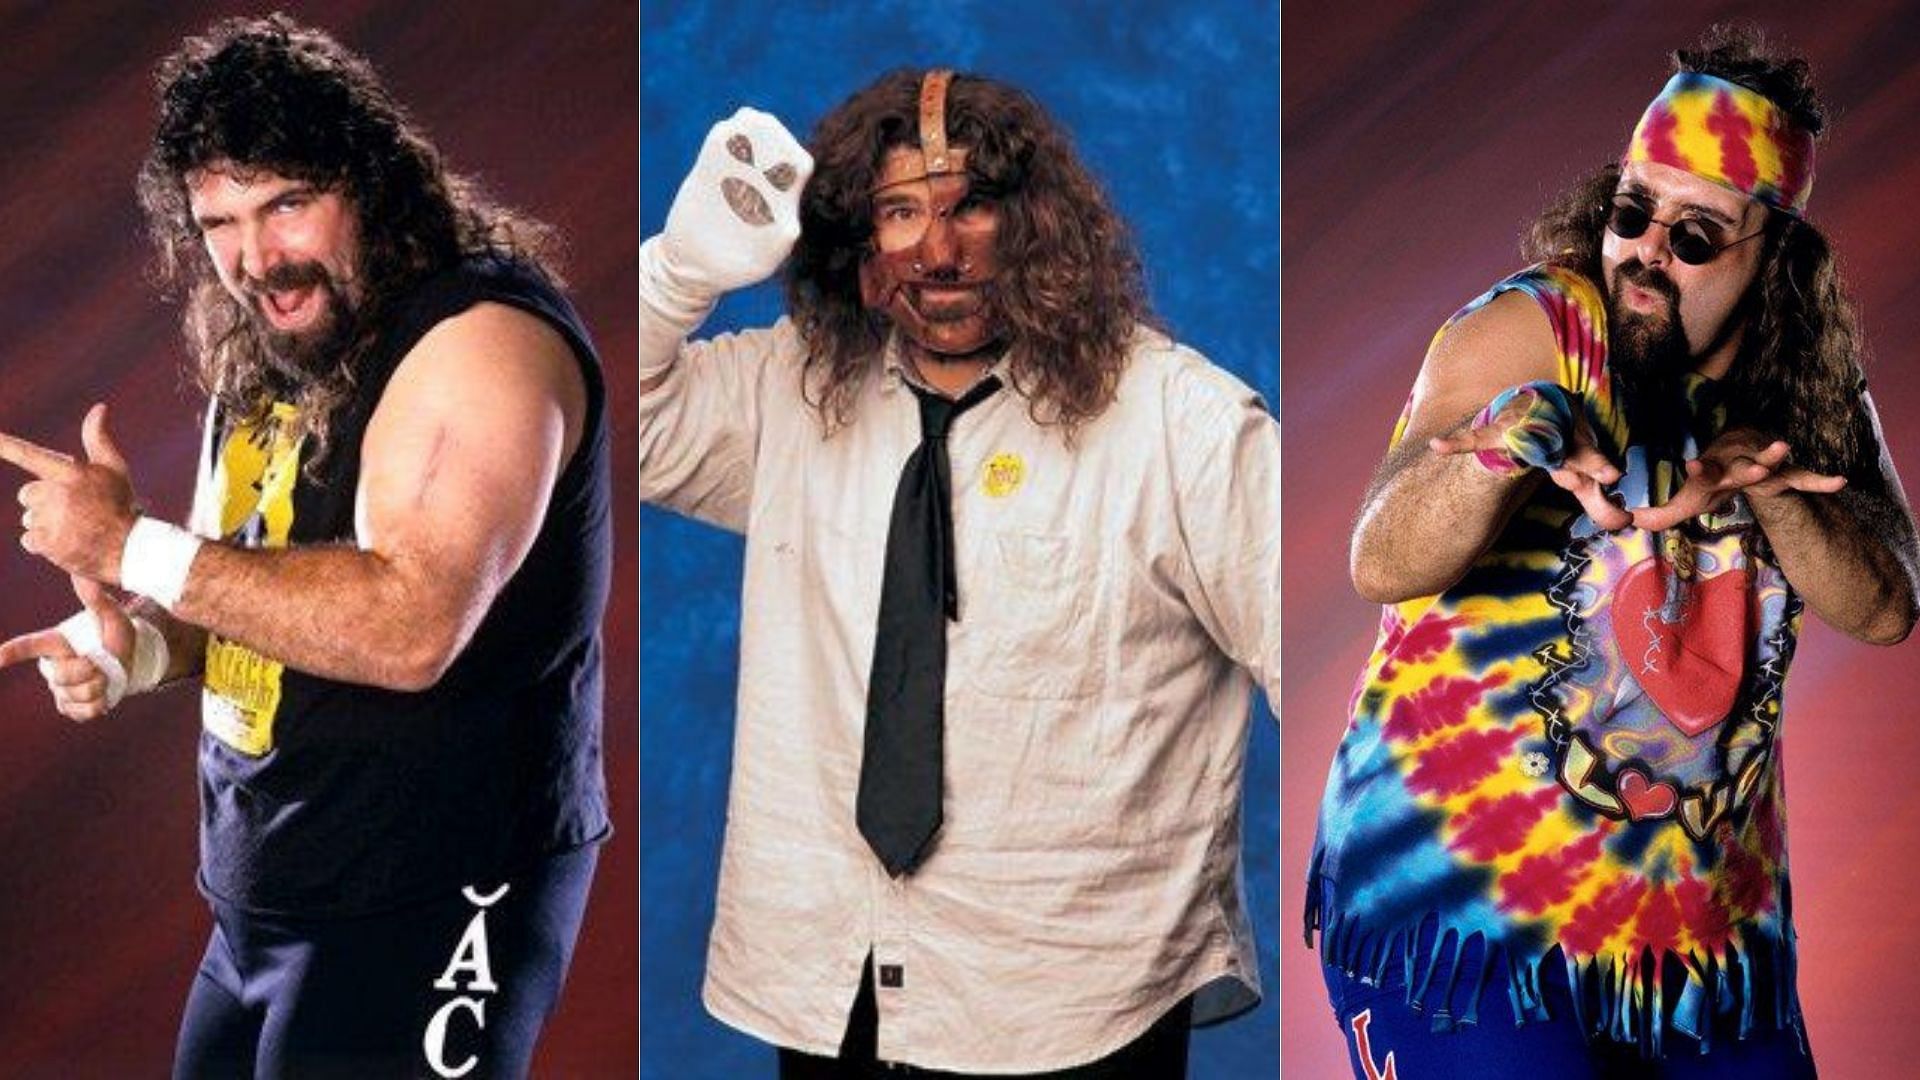 The three faces of Mick Foley: Cactus Jack (left), Mankind (center), and Dude Love (right)